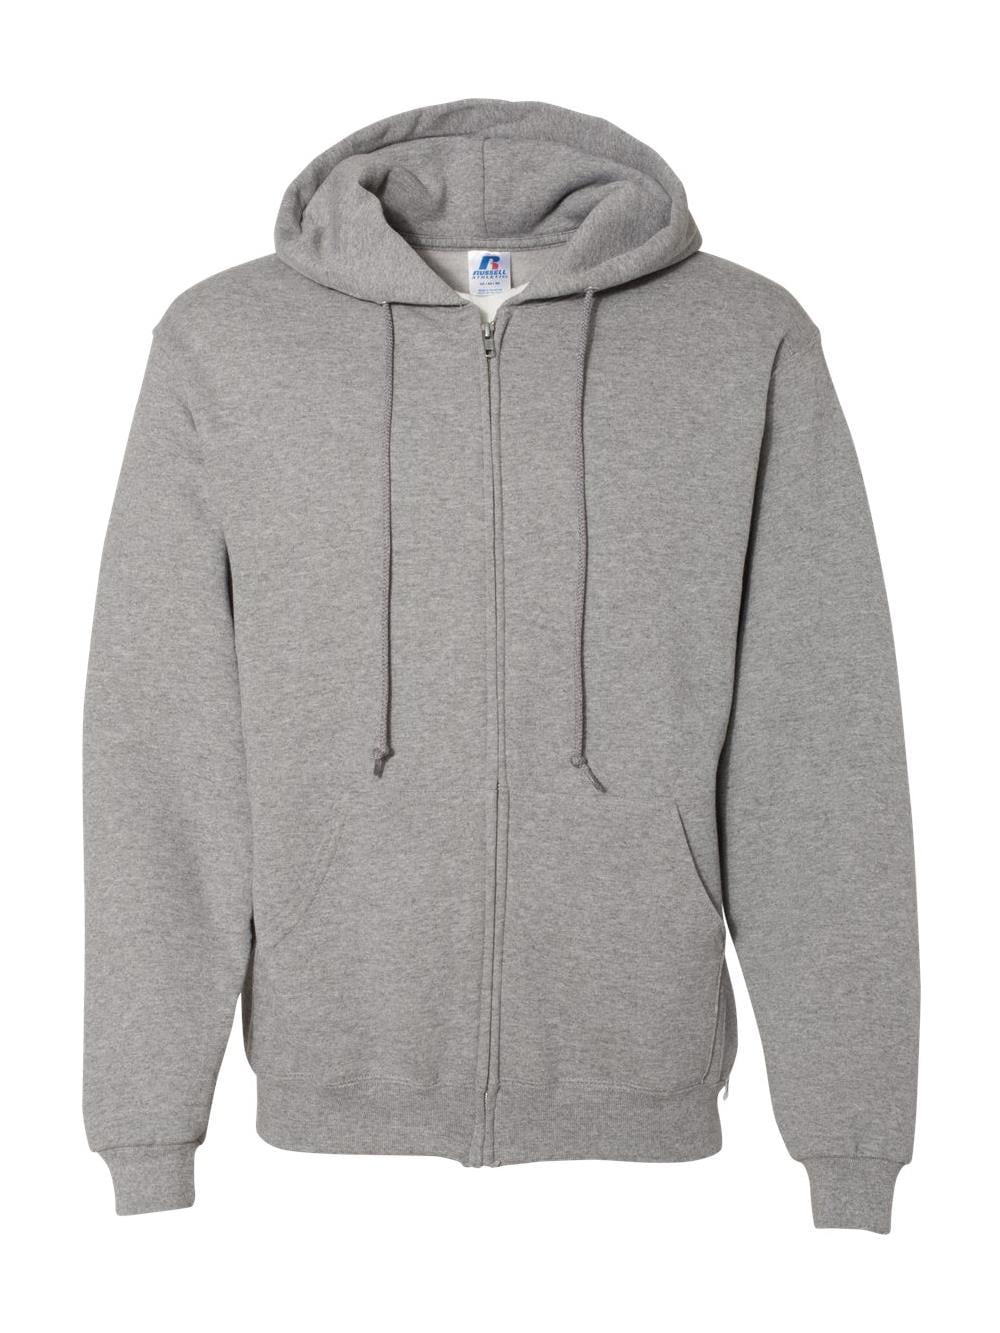 Russell Athletic - Russell Athletic Fleece Dri Power? Hooded Full-Zip ...